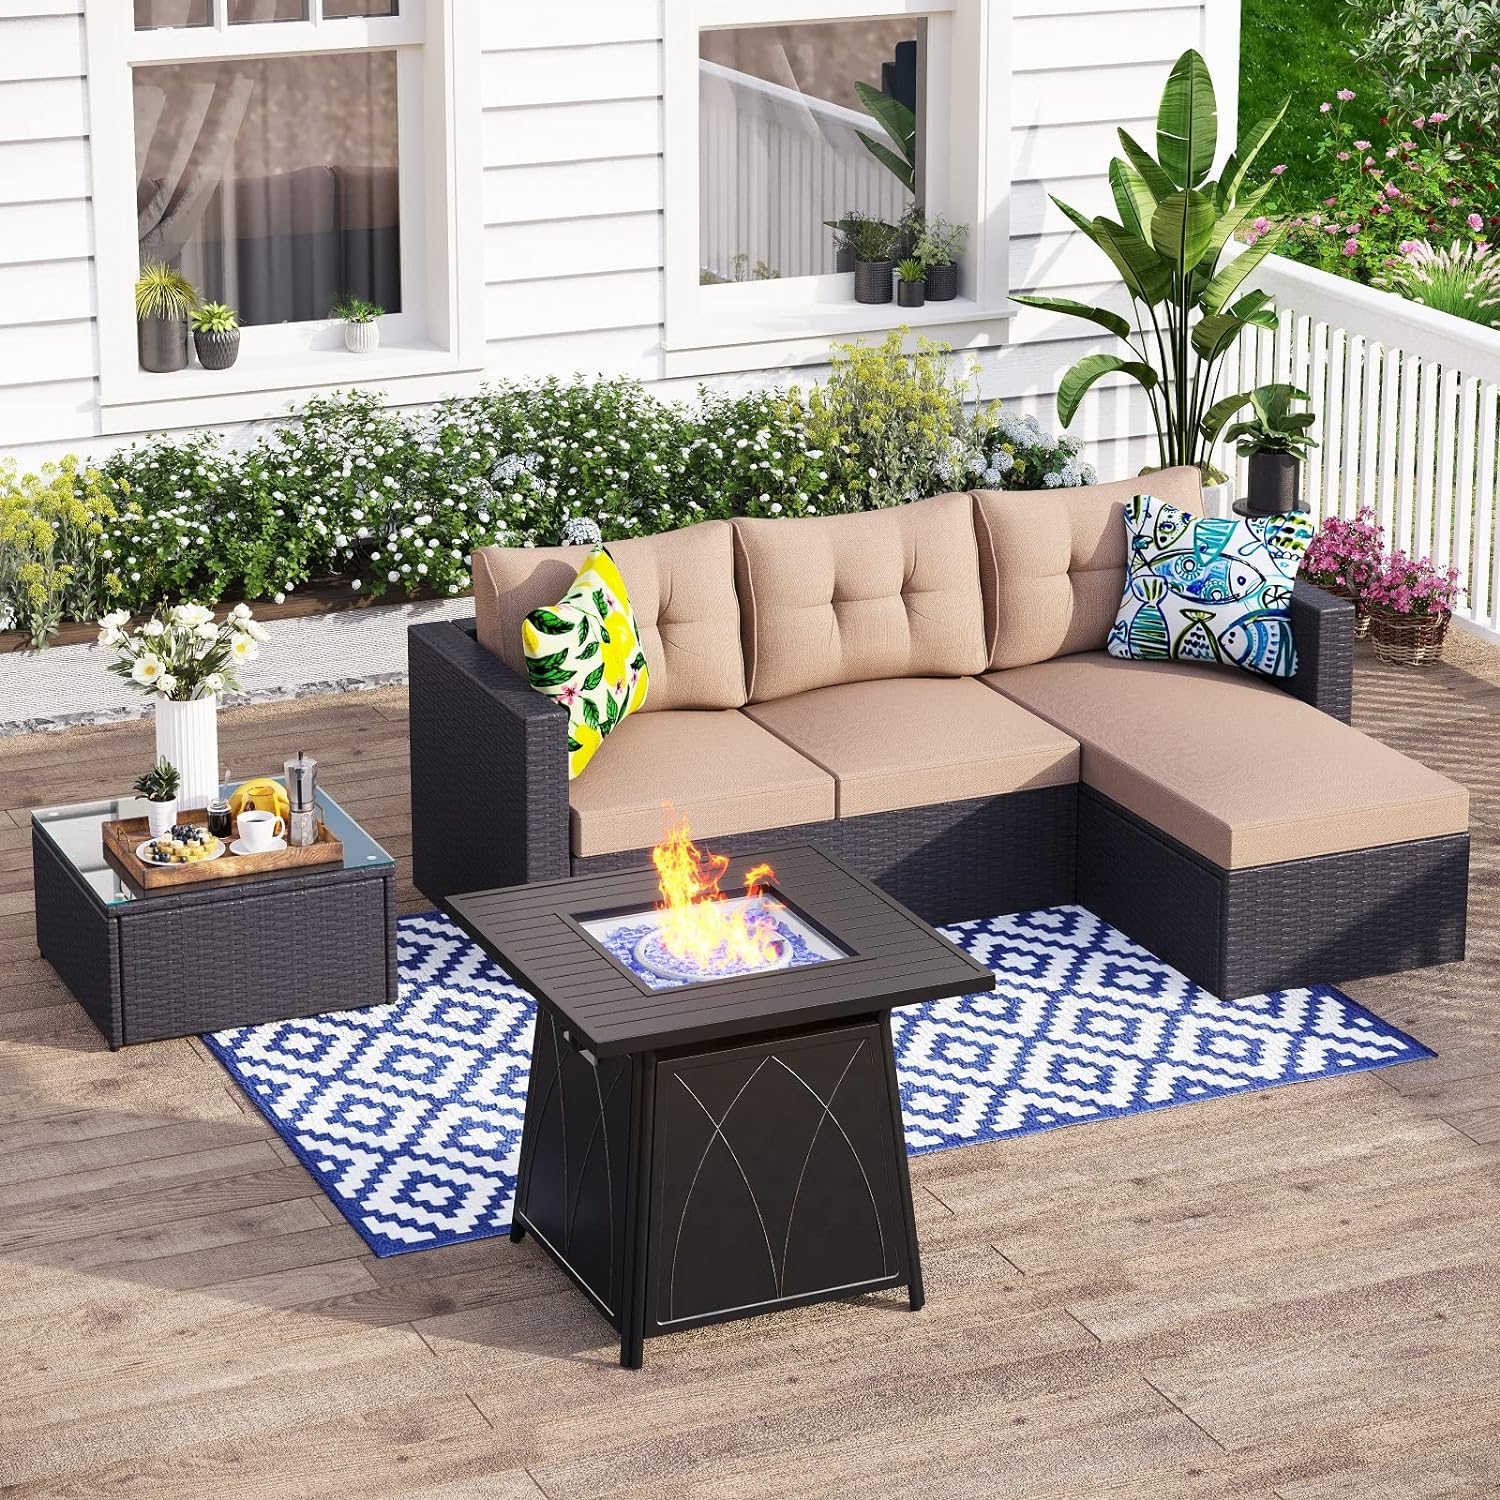 MFSTUDIO 4 Pieces Patio Furniture Set with Fire Pit Table, Outdoor Sectional Wicker Patio Sofa Sets, 28 50000BTU Propane Fire Pit Patio Conversation Set with Glass Coffee Table & Rattan Couch-Beige